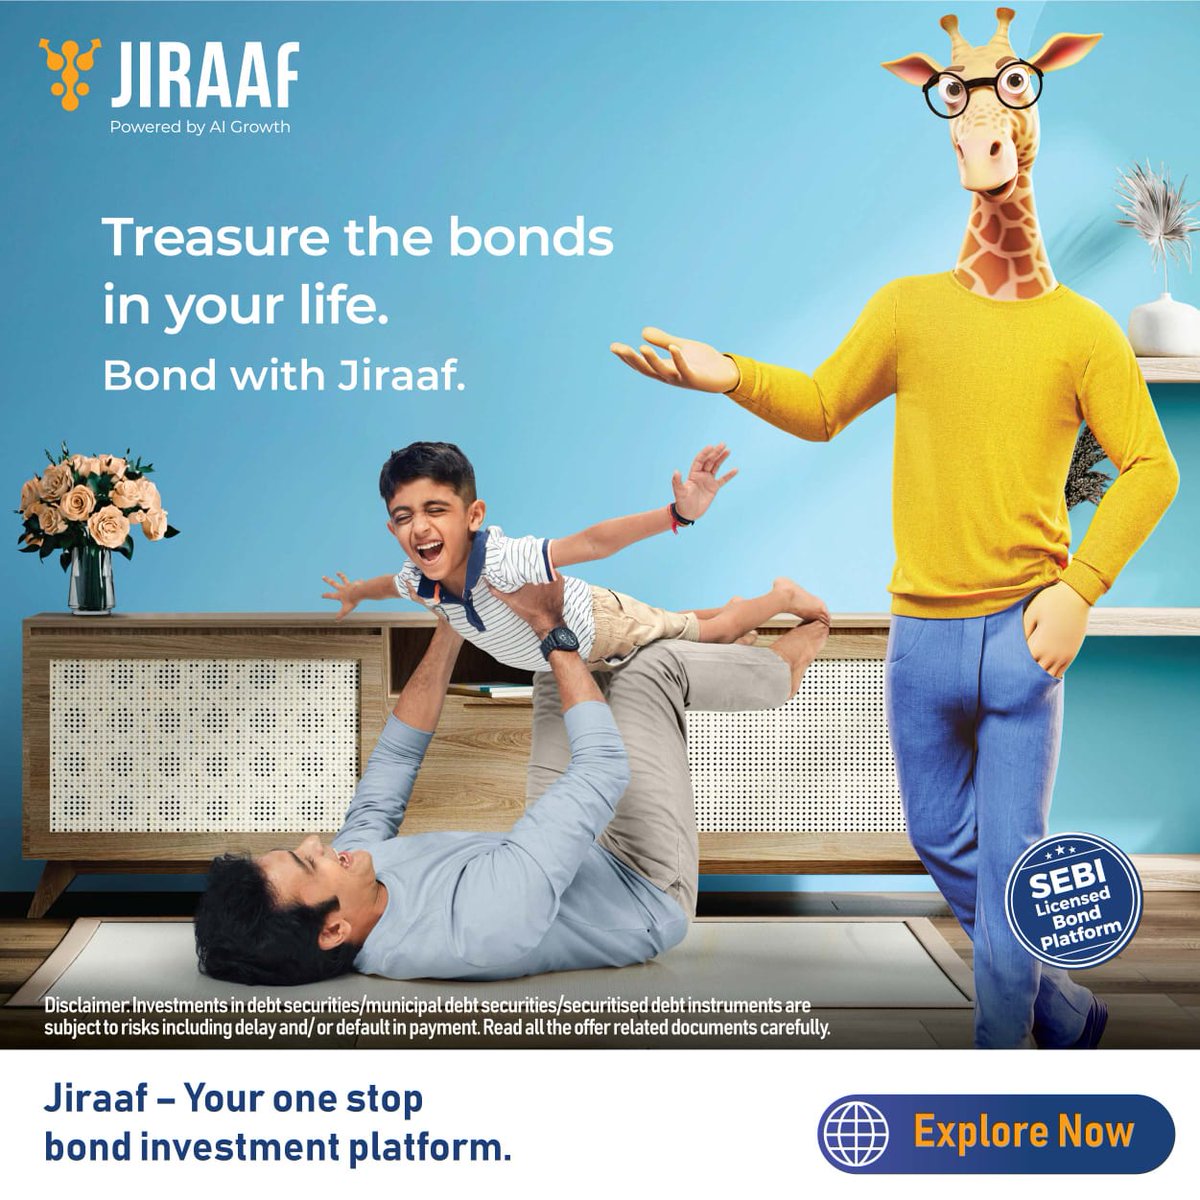 It's very important to join Jiraaf for their bond investments with a minimum investment
of just ₹10,000/- and start securing your future today . #BondWithJiraaf